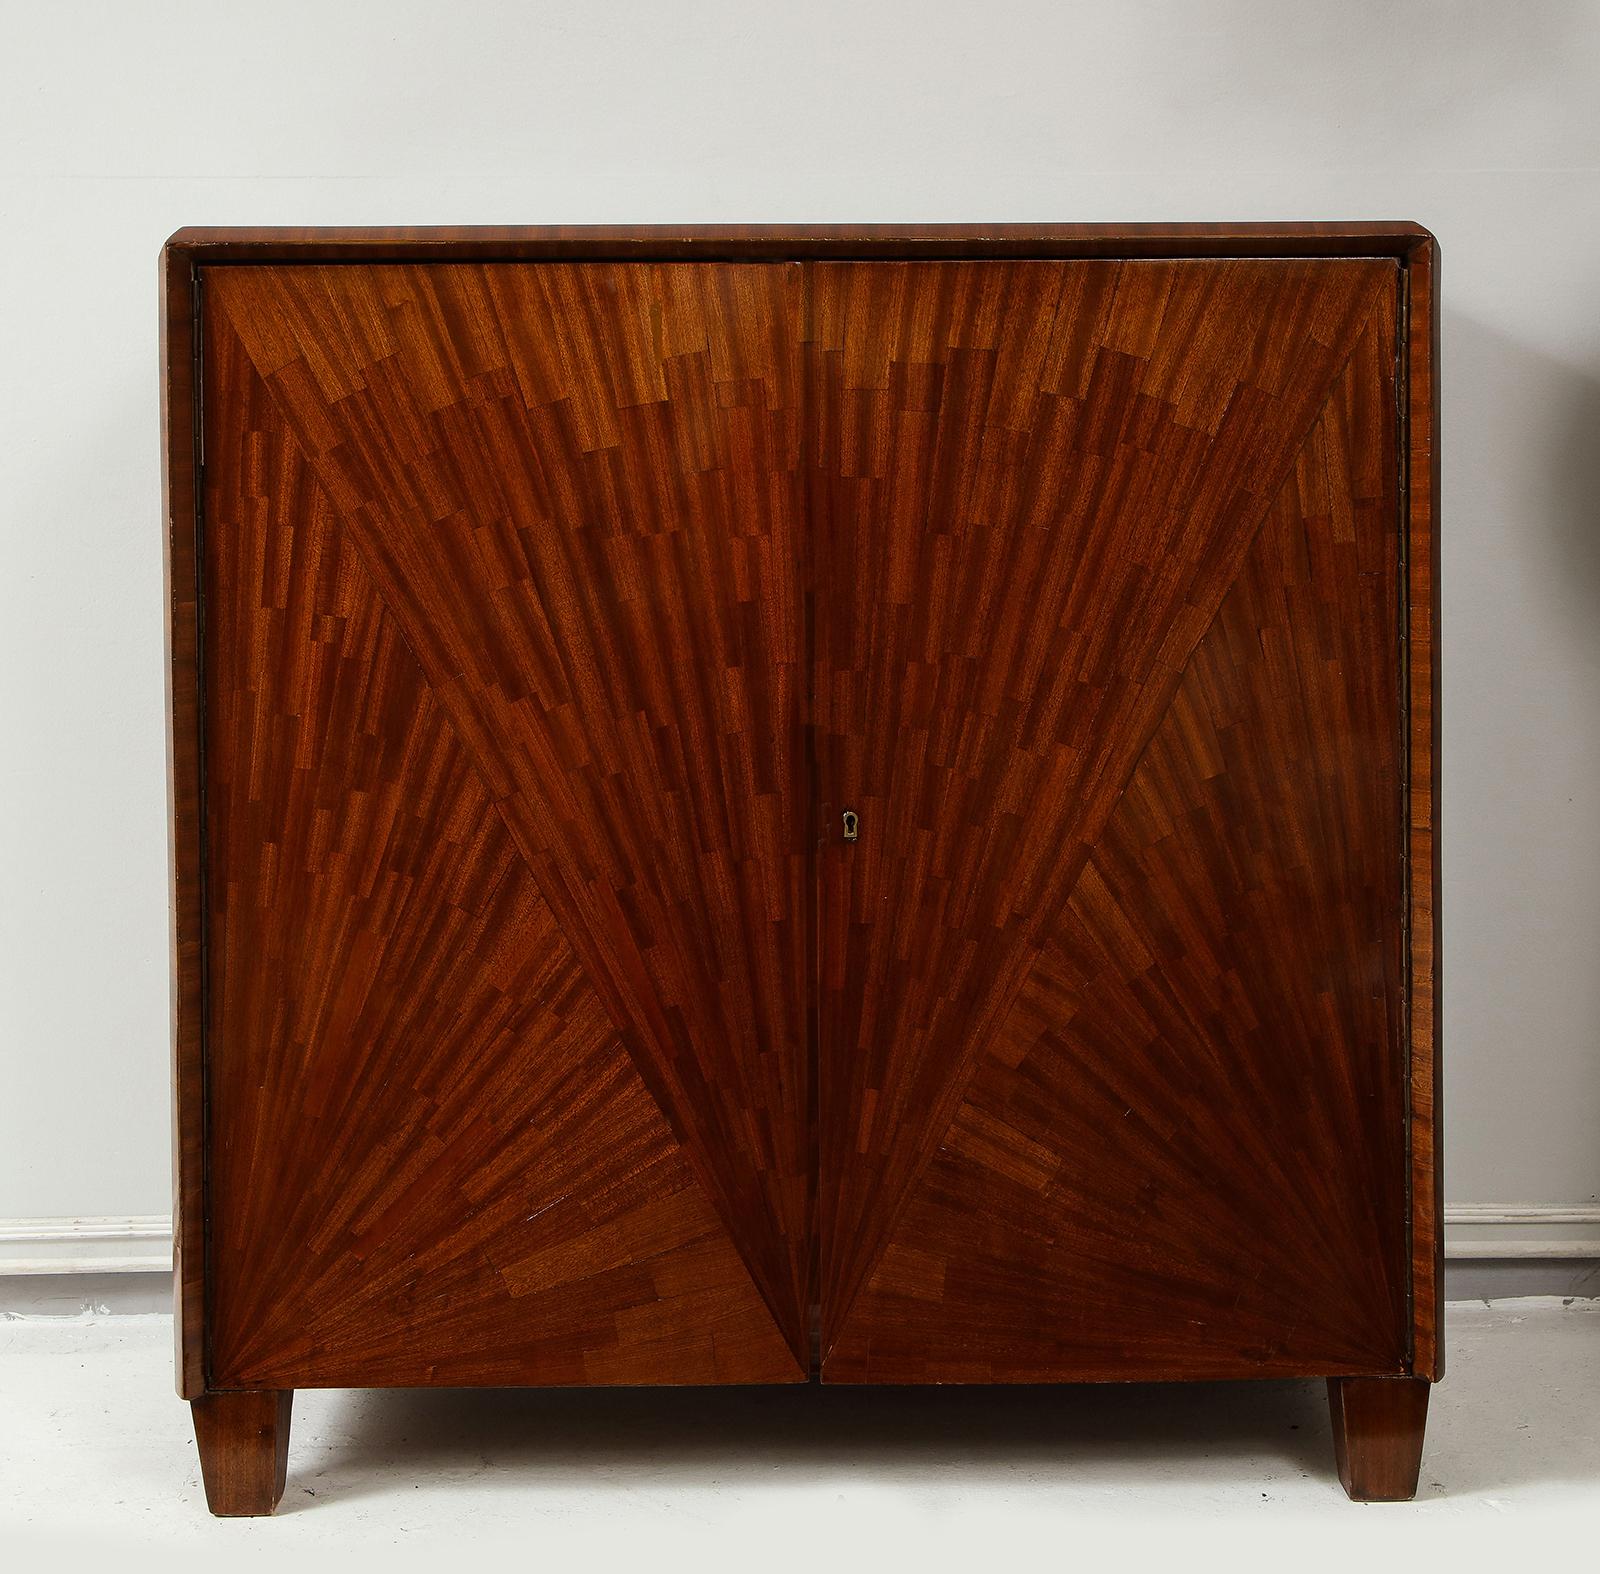 Parquetry cabinet in the Jean-Michel Frank manner.